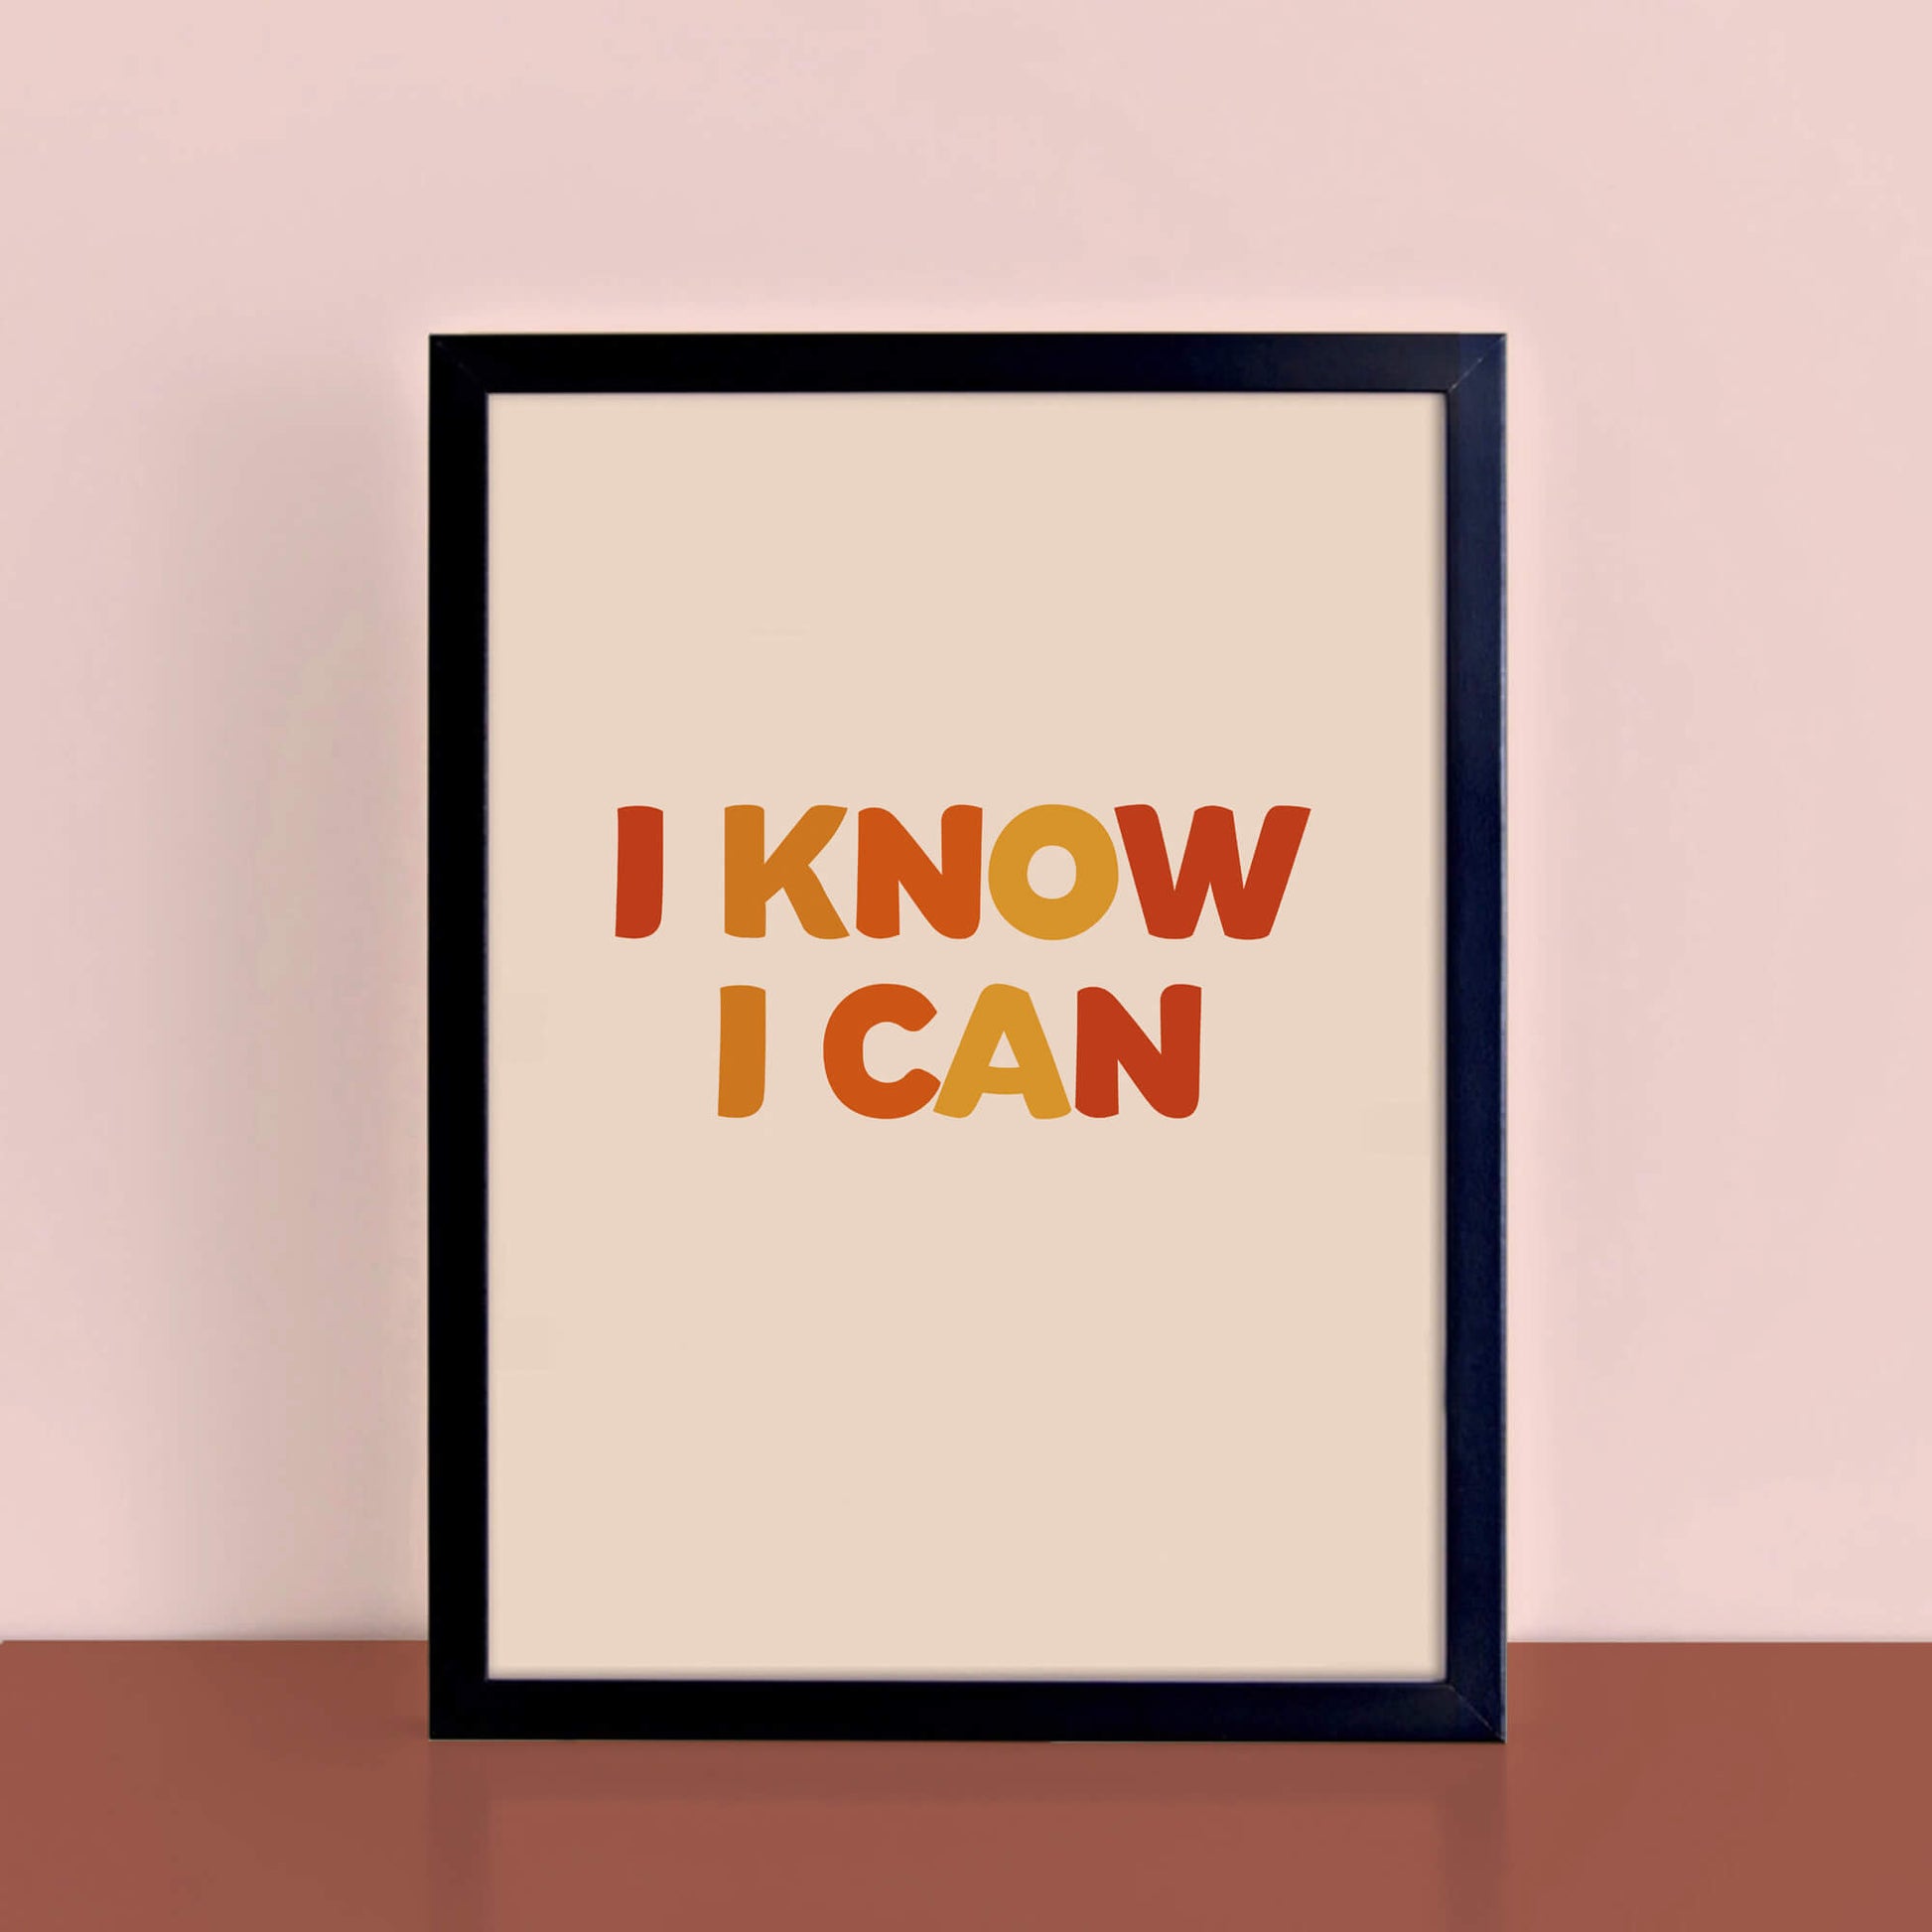 I Know I Can Wallprint by SixElevenCreations. Product Code SEP0607